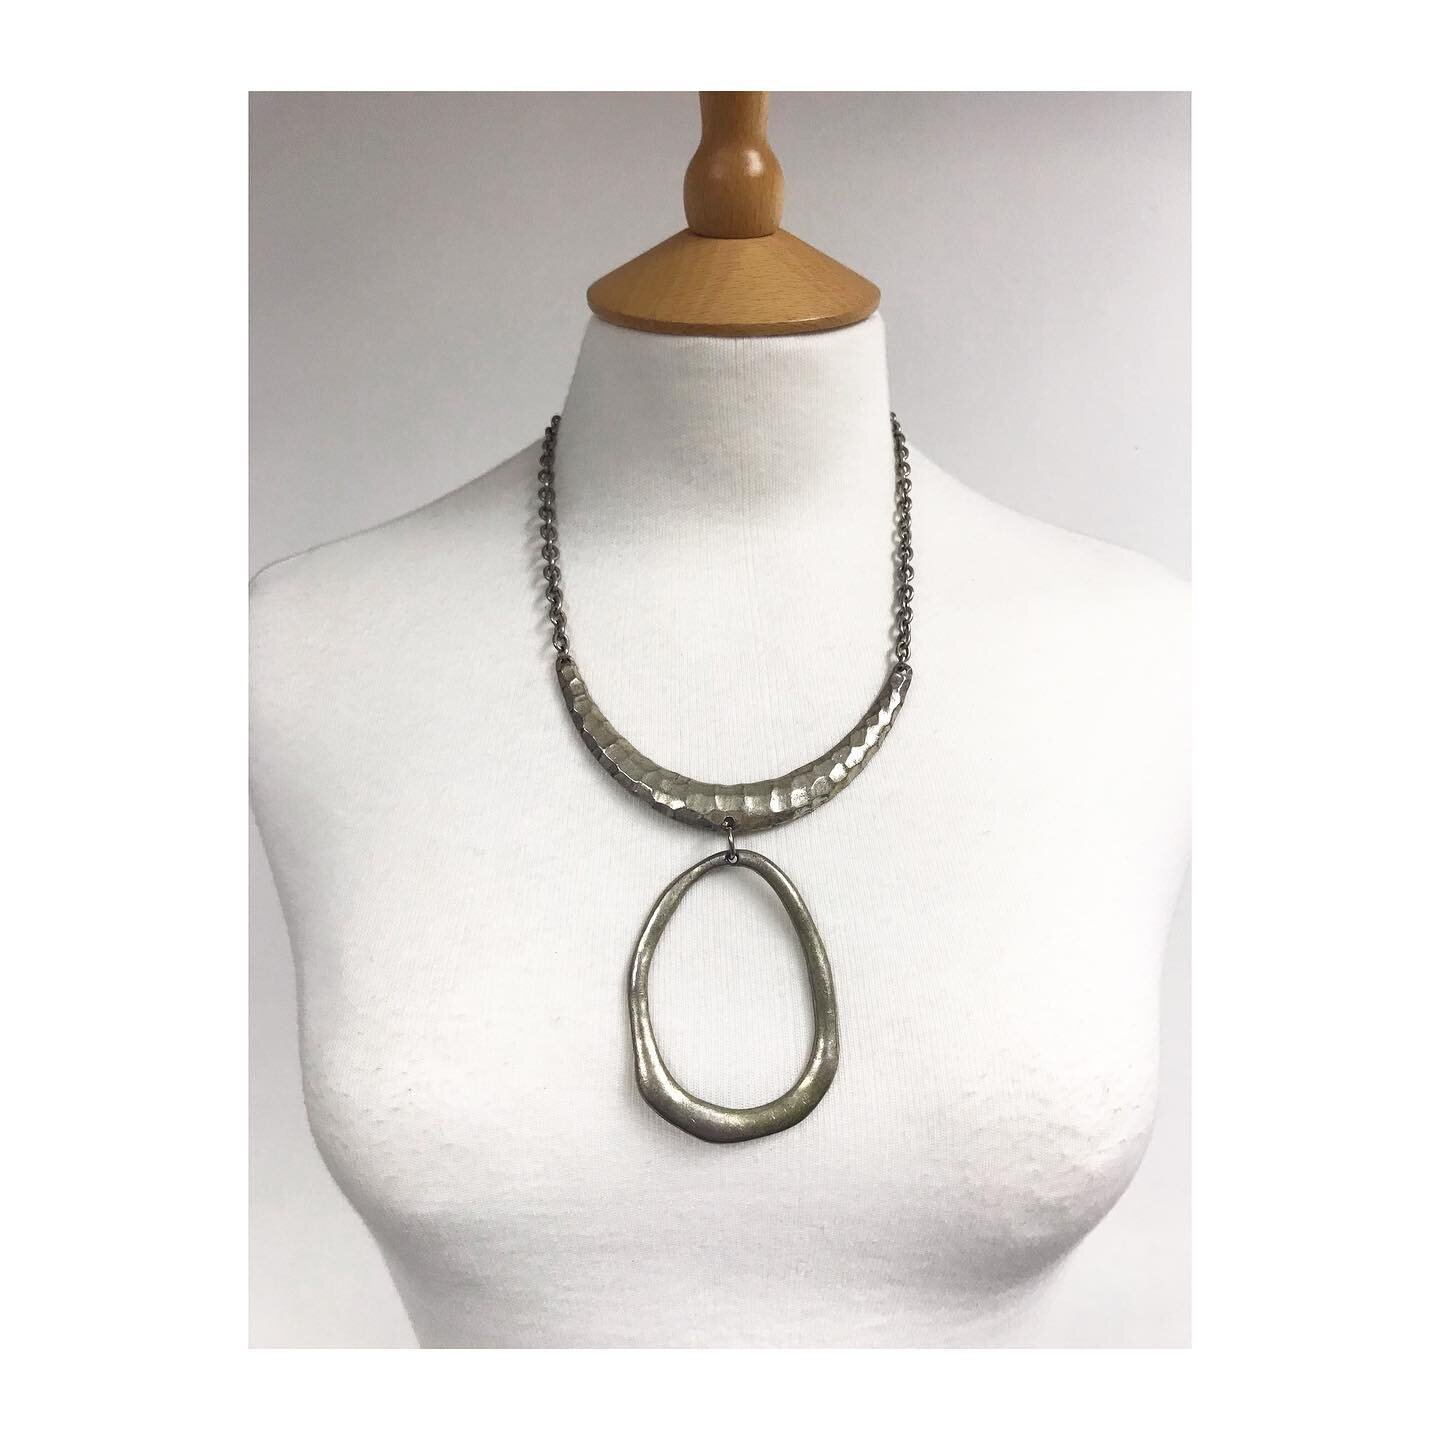 One of our amazing unique necklaces 🌙.
.
.
.
.
.
.
.
.
.
#necklace #jewellery #uniquejewellery #oneoffpieces #accessories #silver #silvernecklace #costumehire #costumehouse #costumehousefinds #hiredontbuy #treasuretrove #rings #bracelets #watch #ear